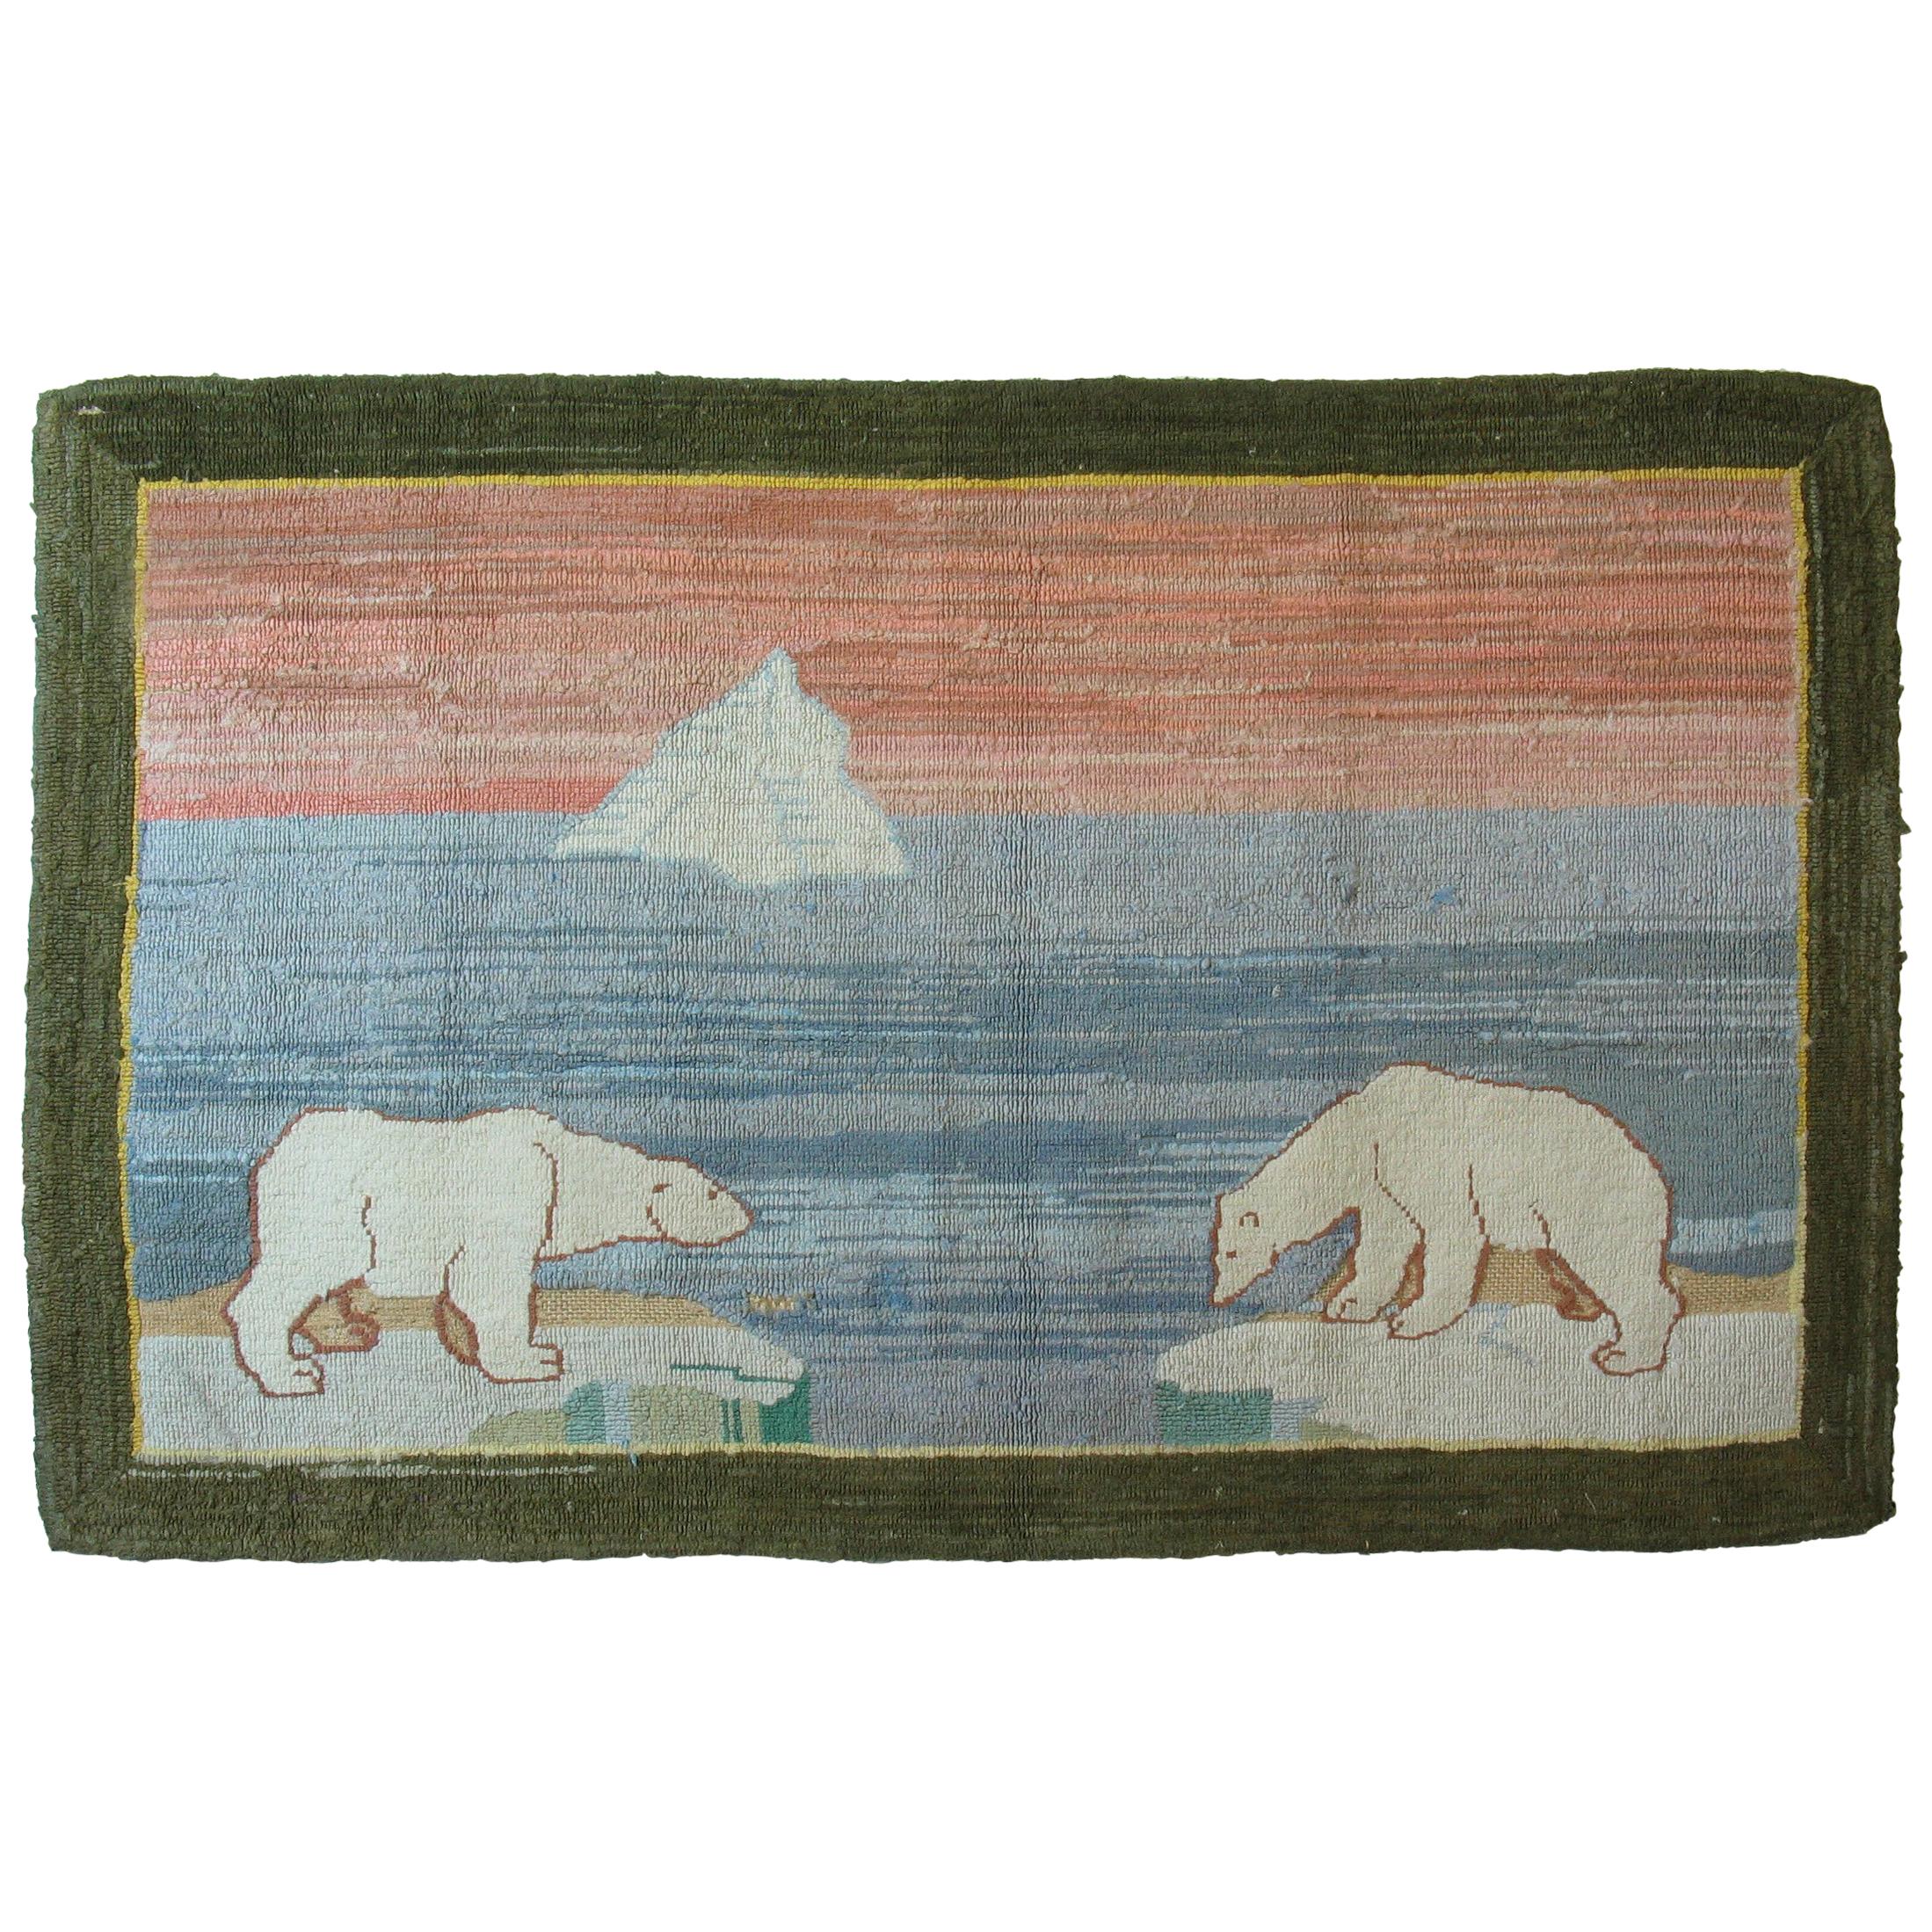 Large Grenfell Polar Bear Hooked Rug Grenfell Mission, Early 20th Century